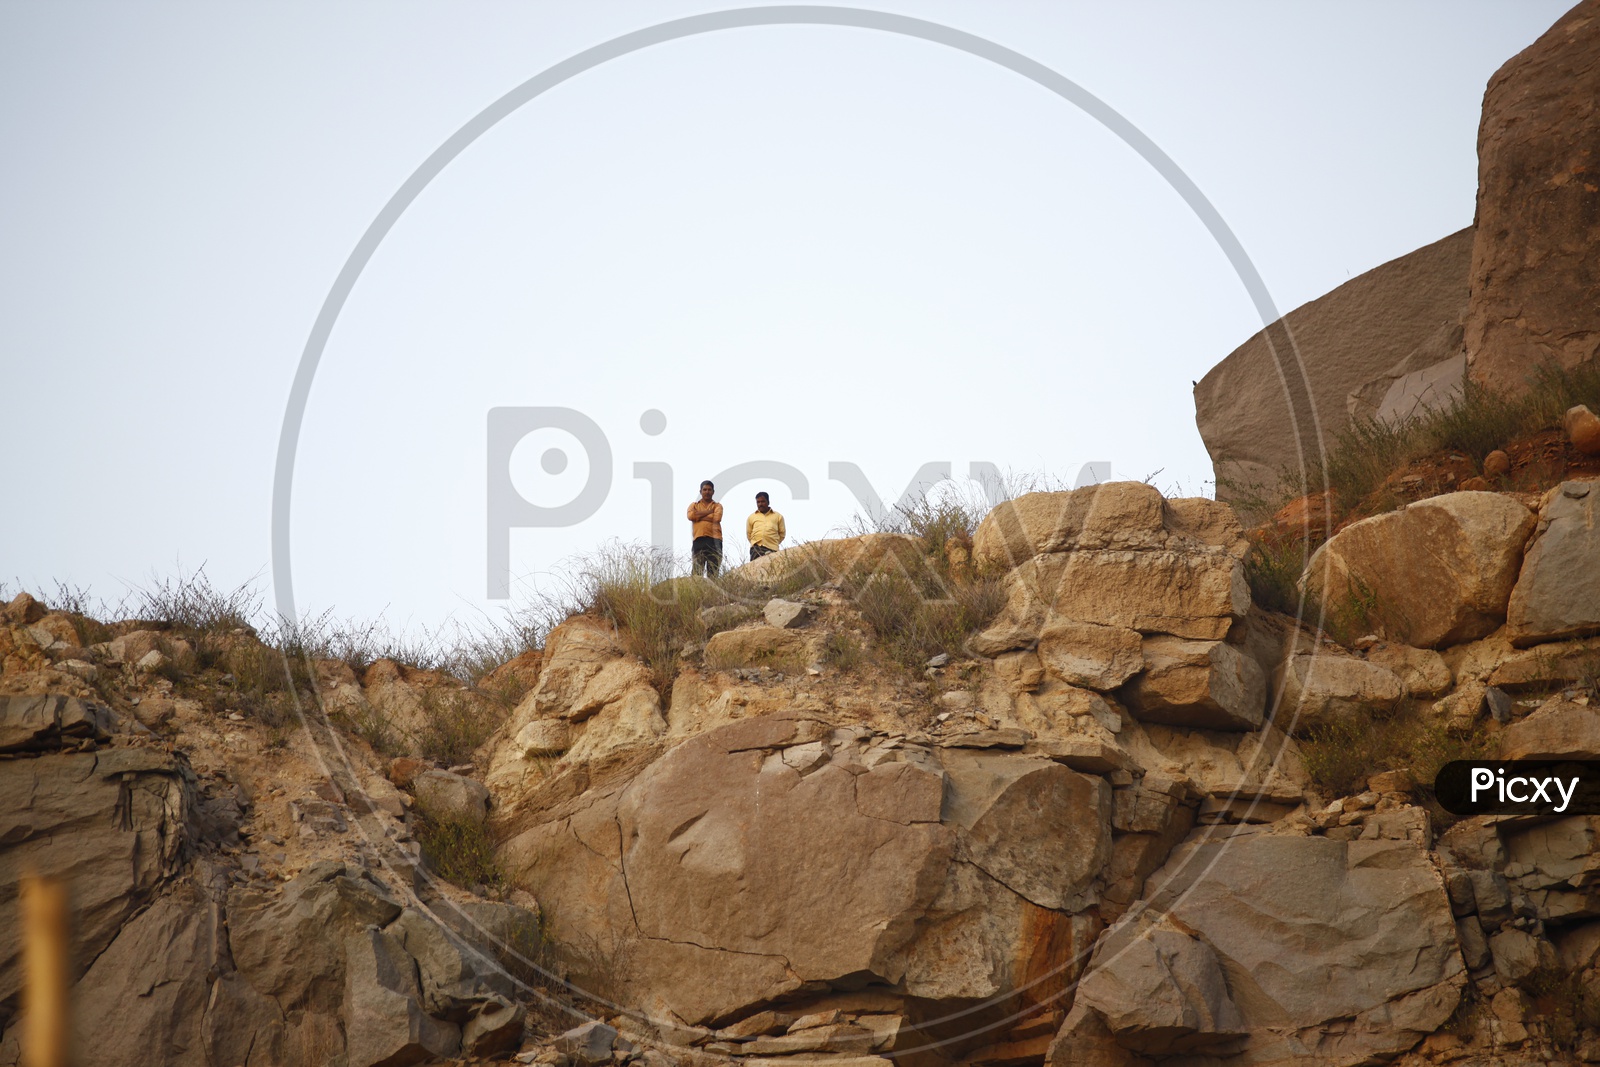 Two men standing on the rocky hill